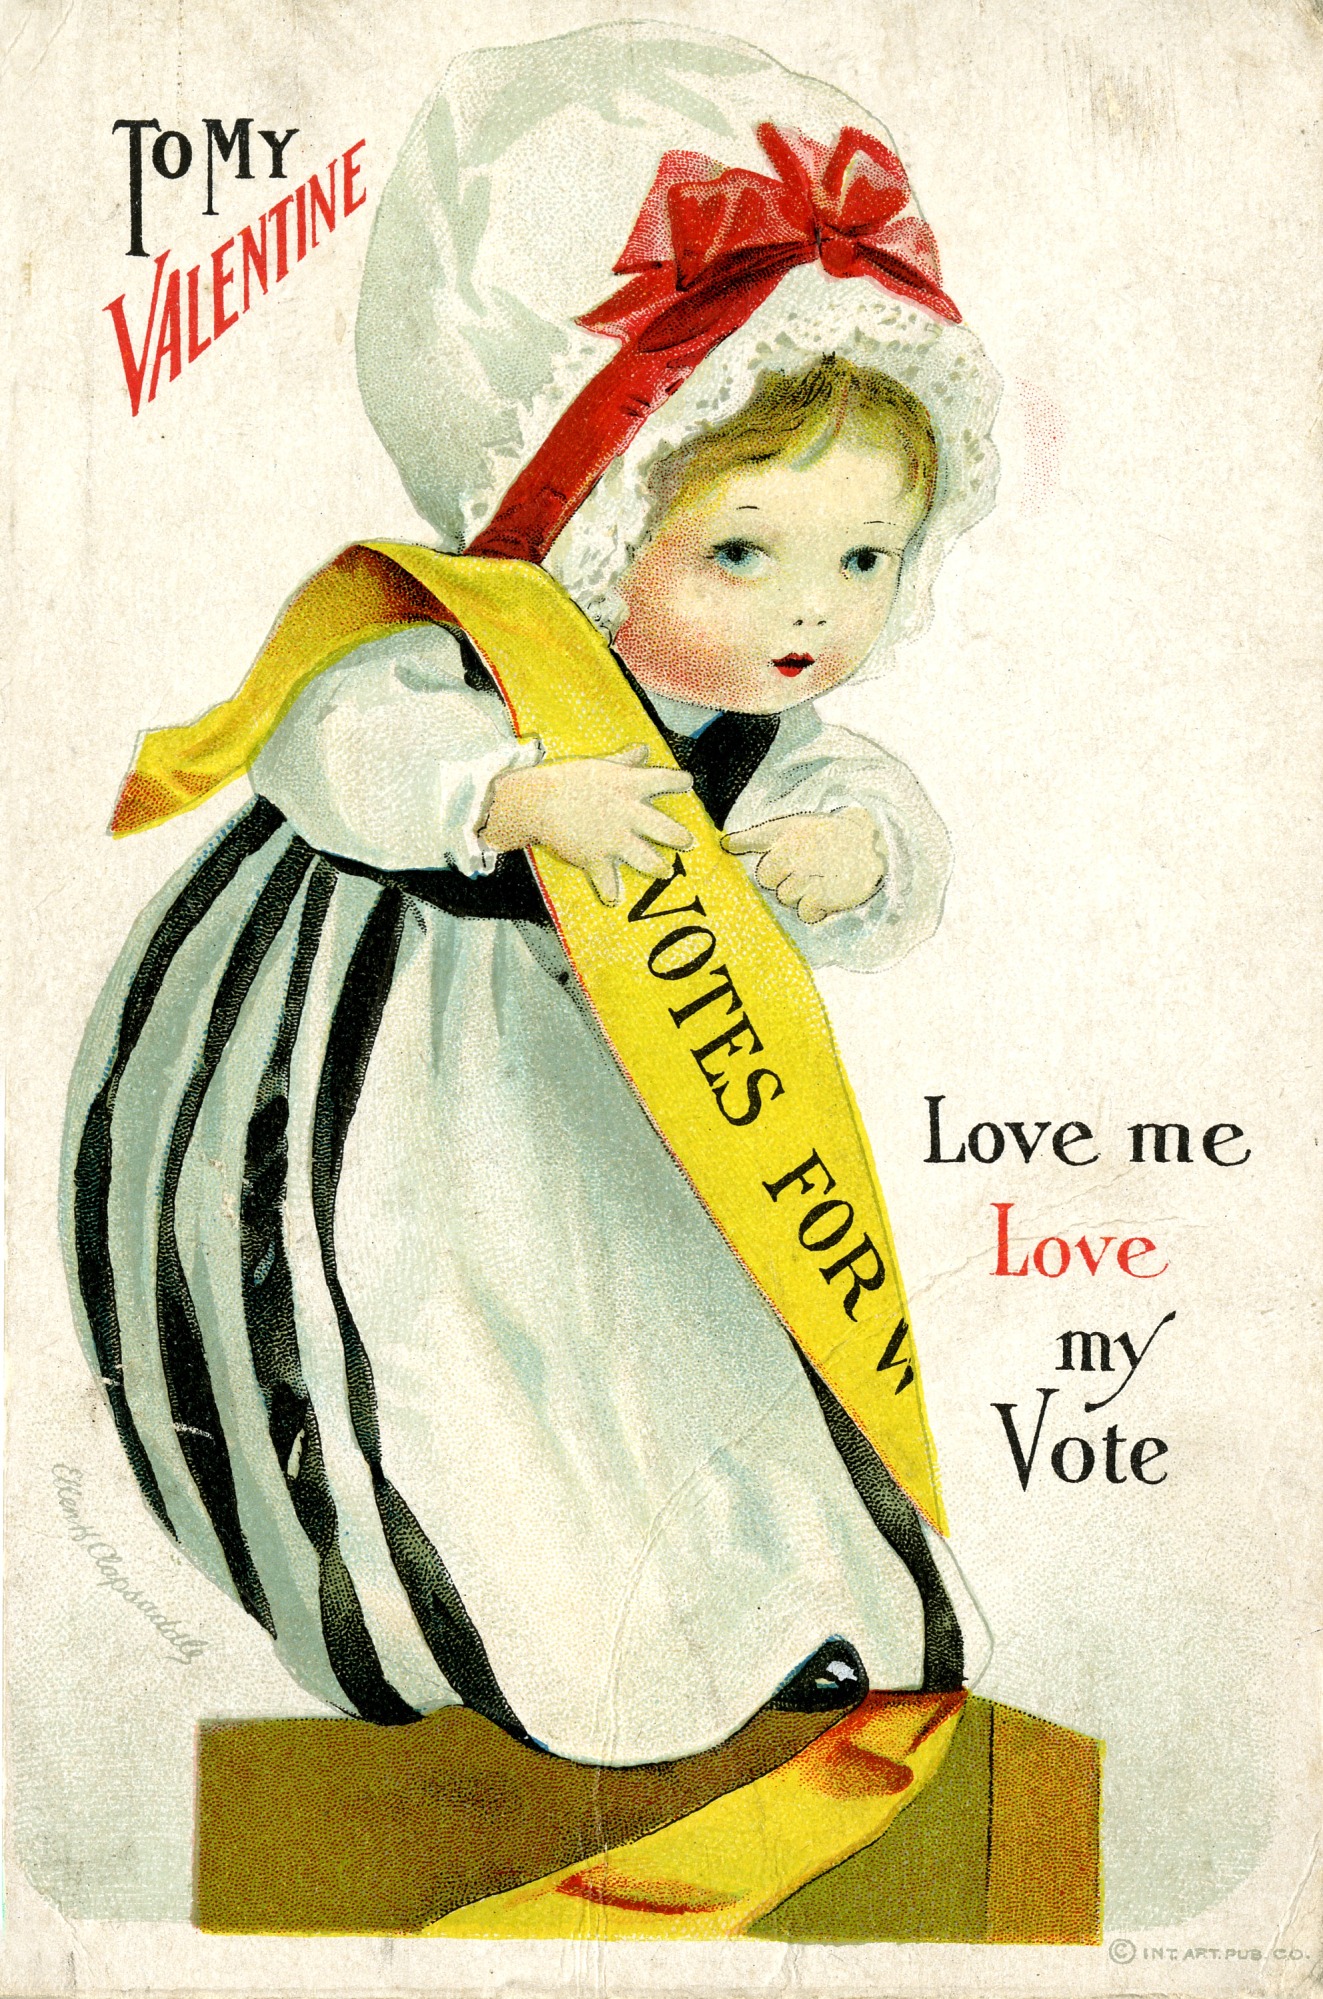 Illustration of a girl wearing a yellow sash reading Votes for Women. Text around her: To my valentine, love me, love my vote